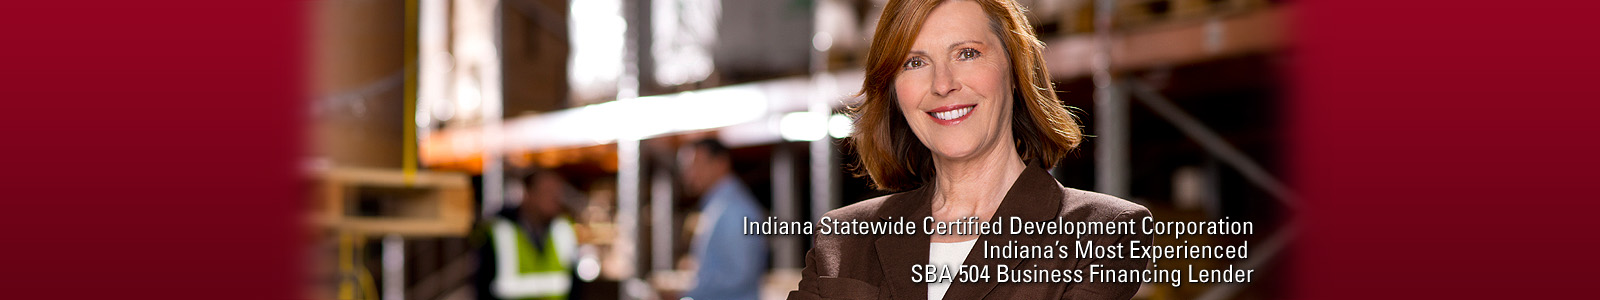 Indiana Statewide Certified Development Corporation